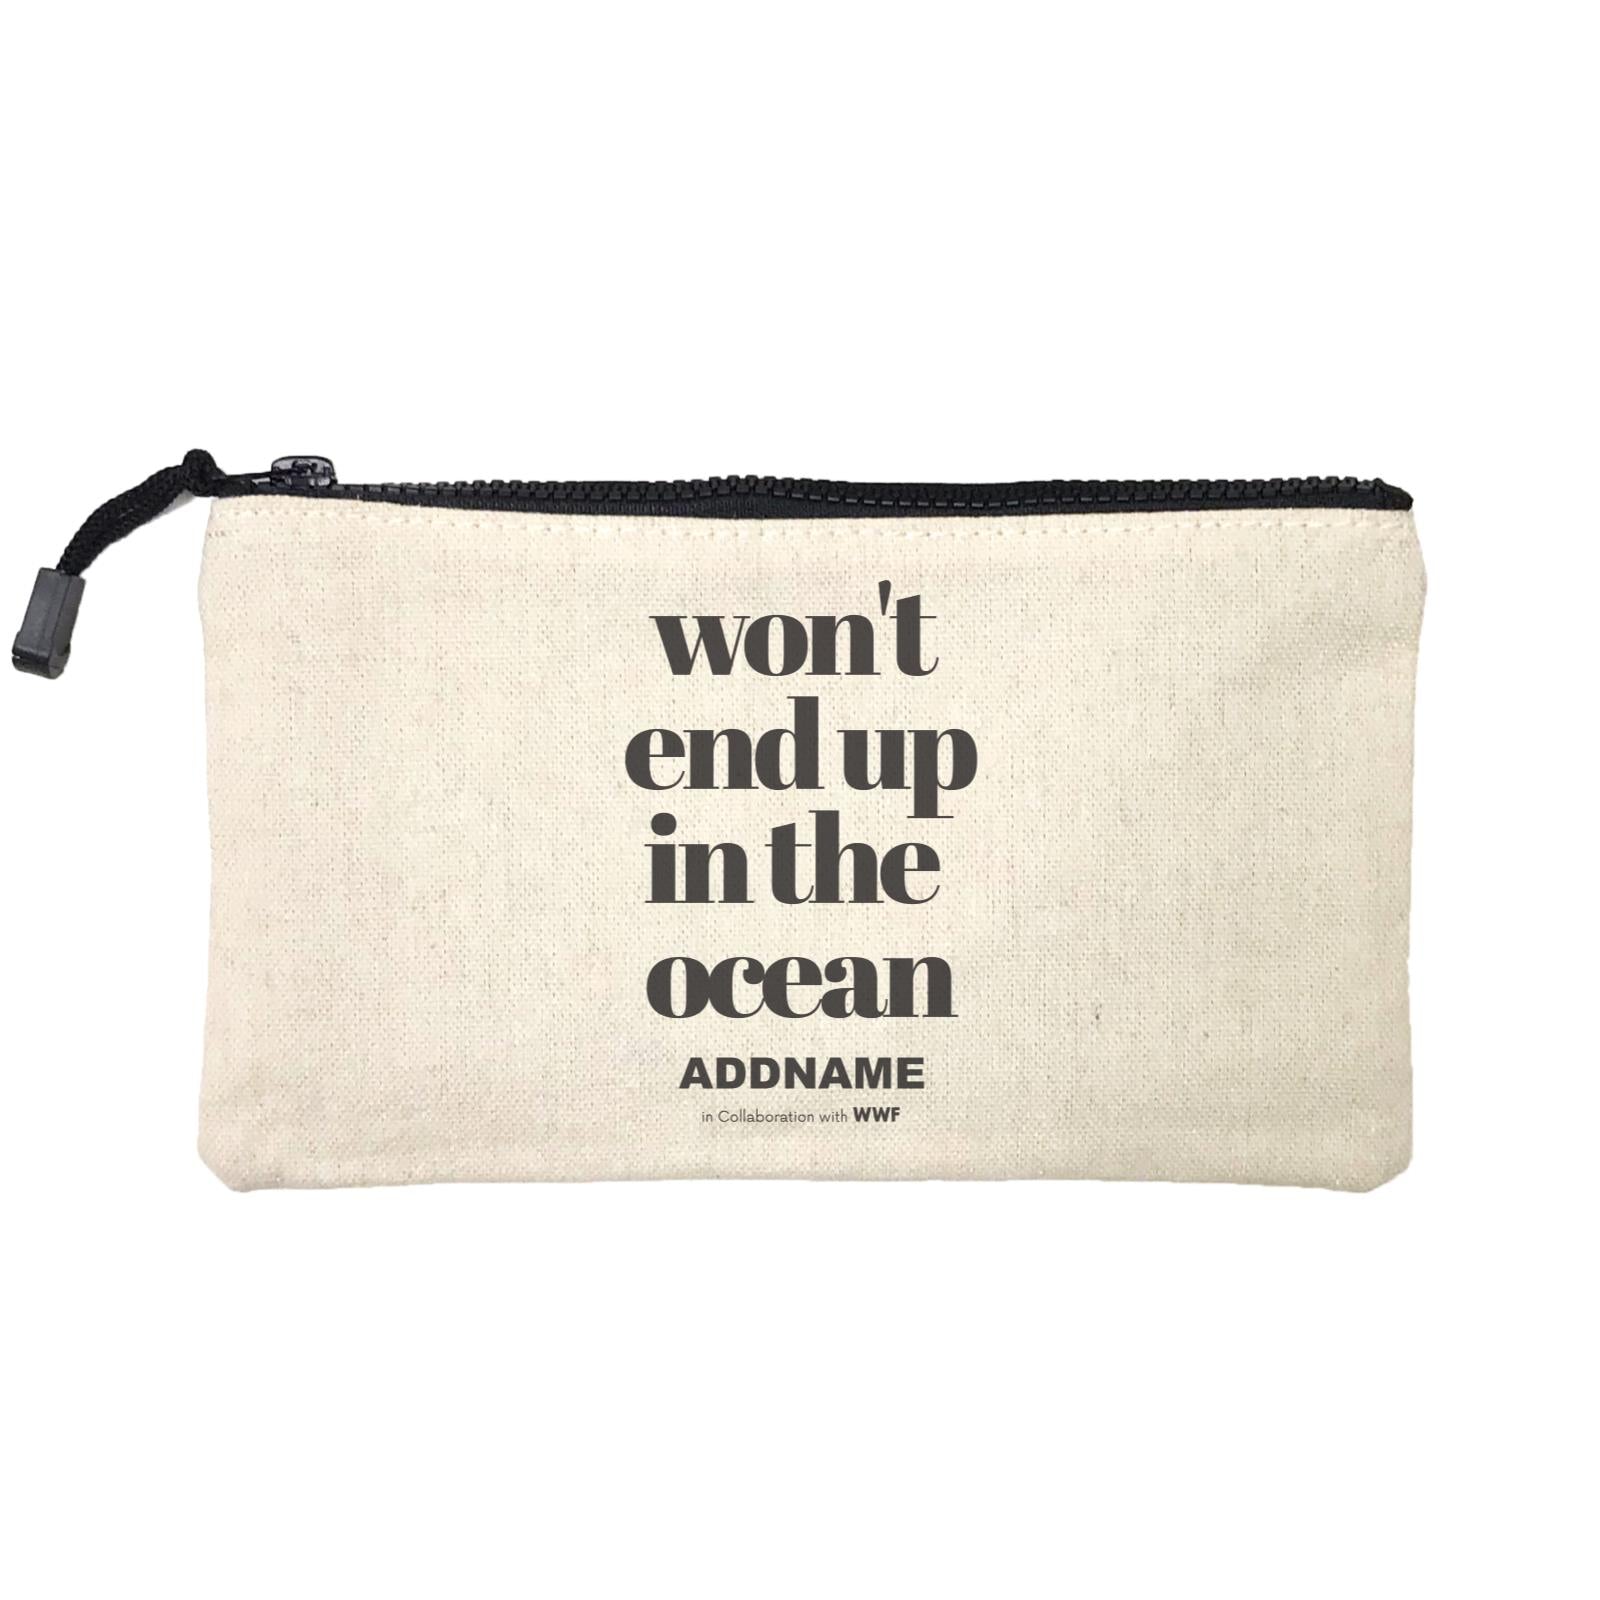 Won't End Up In The Ocean Typography Addname Mini Accessories Stationery Pouch